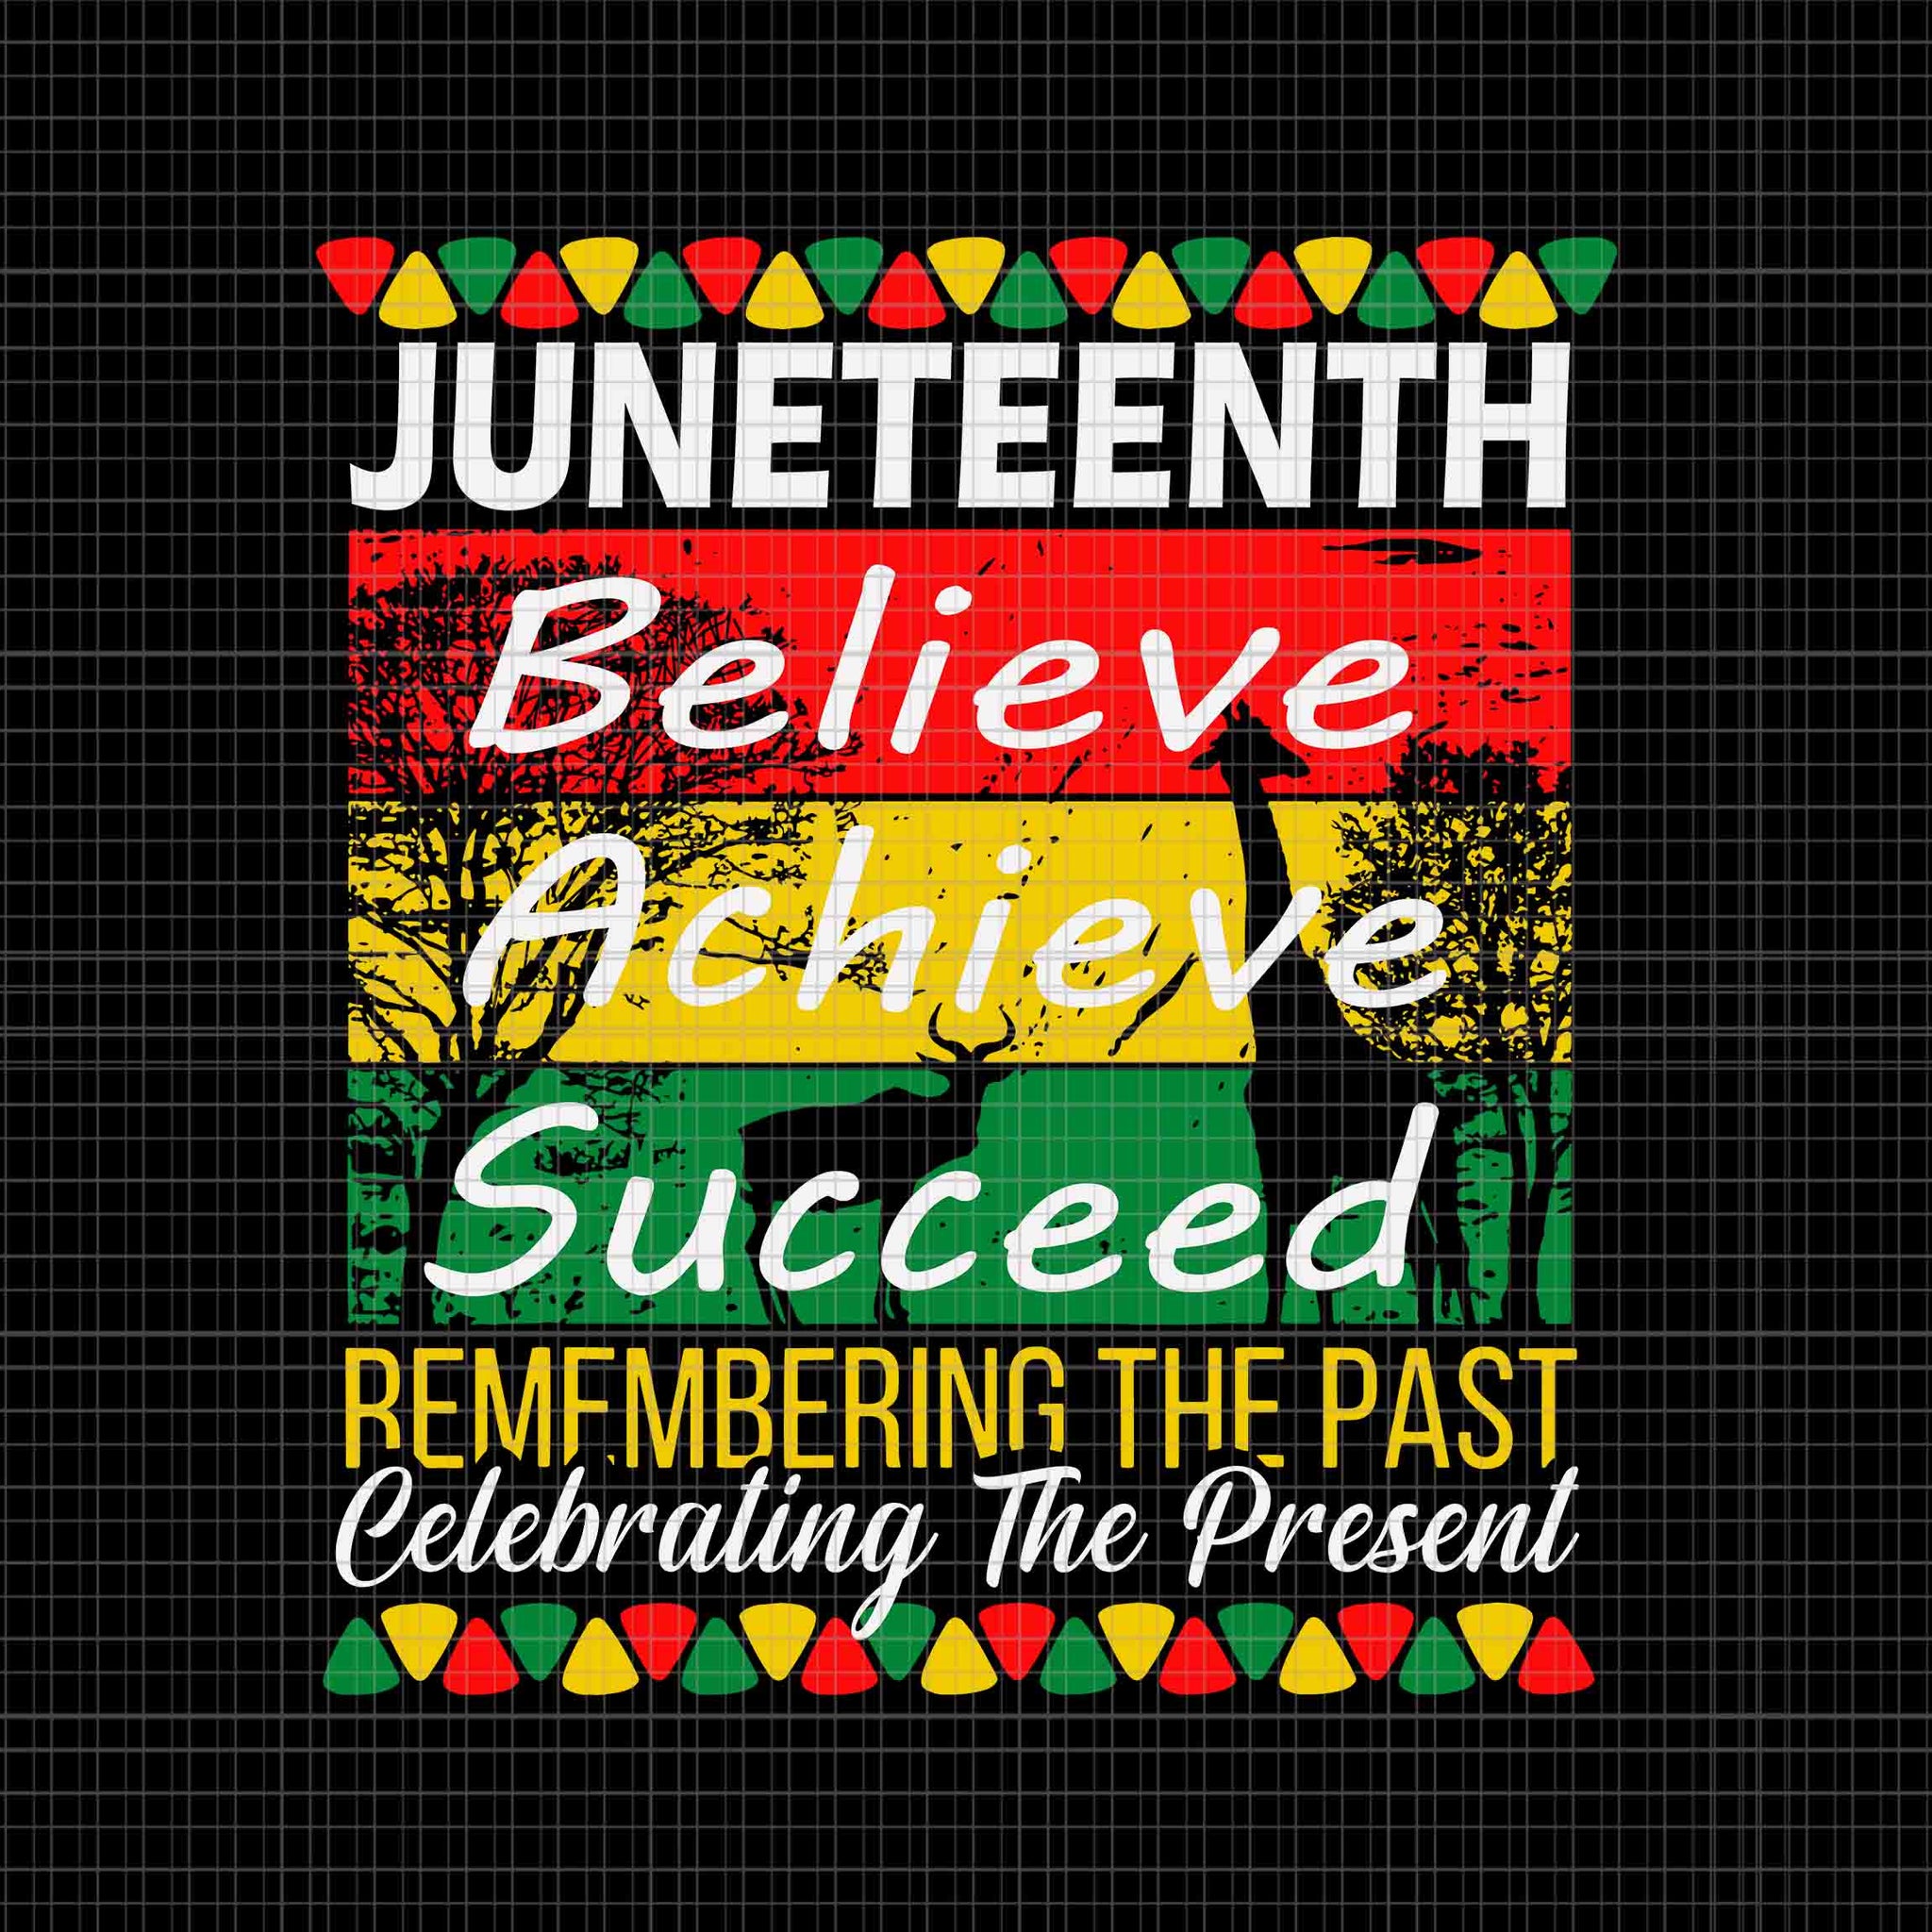 Juneteenth Is My Independence Day Black Pride Melanin Svg, Juneteenth Believe Achieve Succeed Remembering The Past Celebrating The Present Svg, Juneteenth Day Svg, Juneteenth 1865 Svg